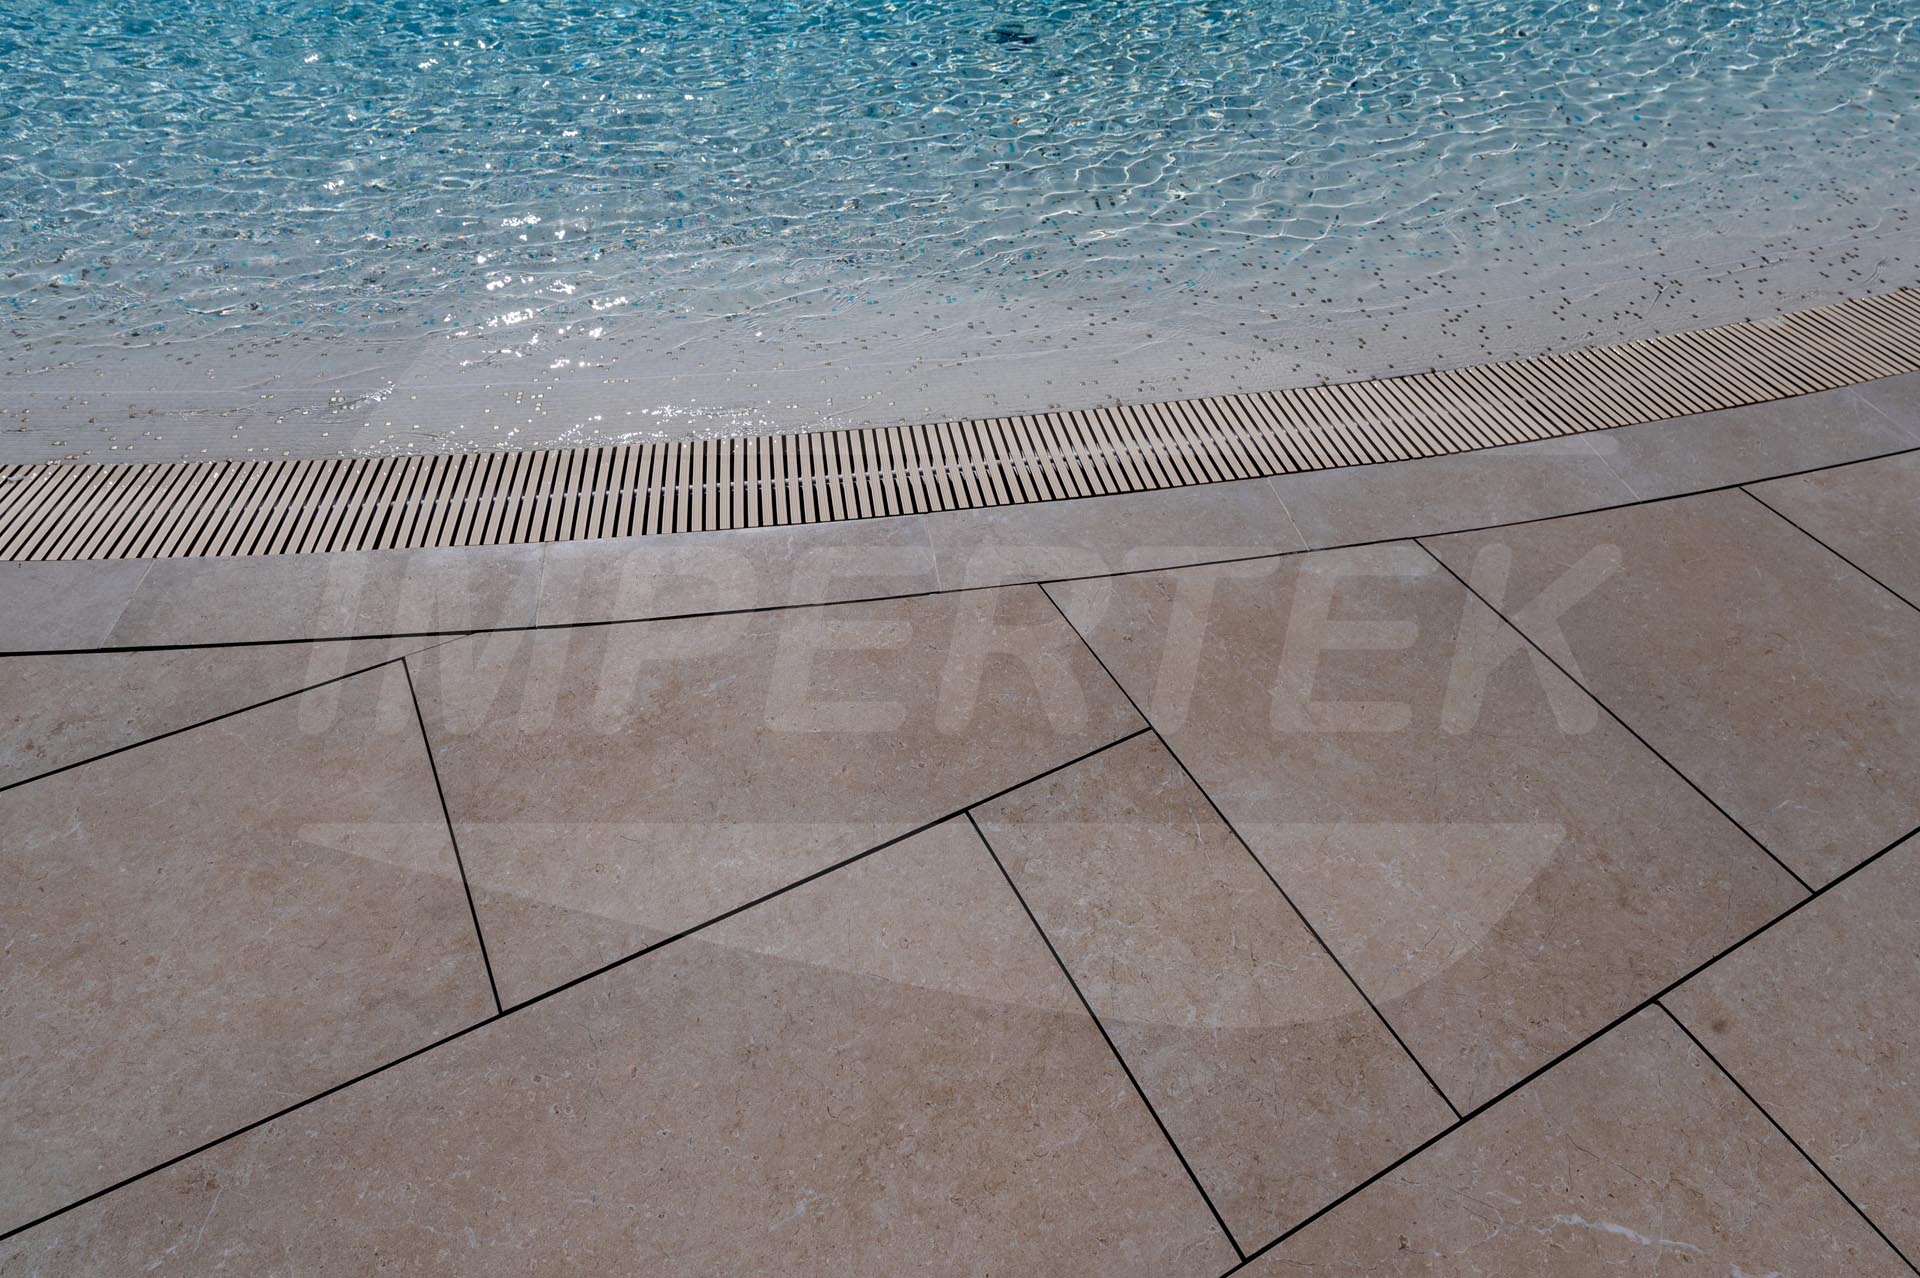 A new pool area signed by Impertek